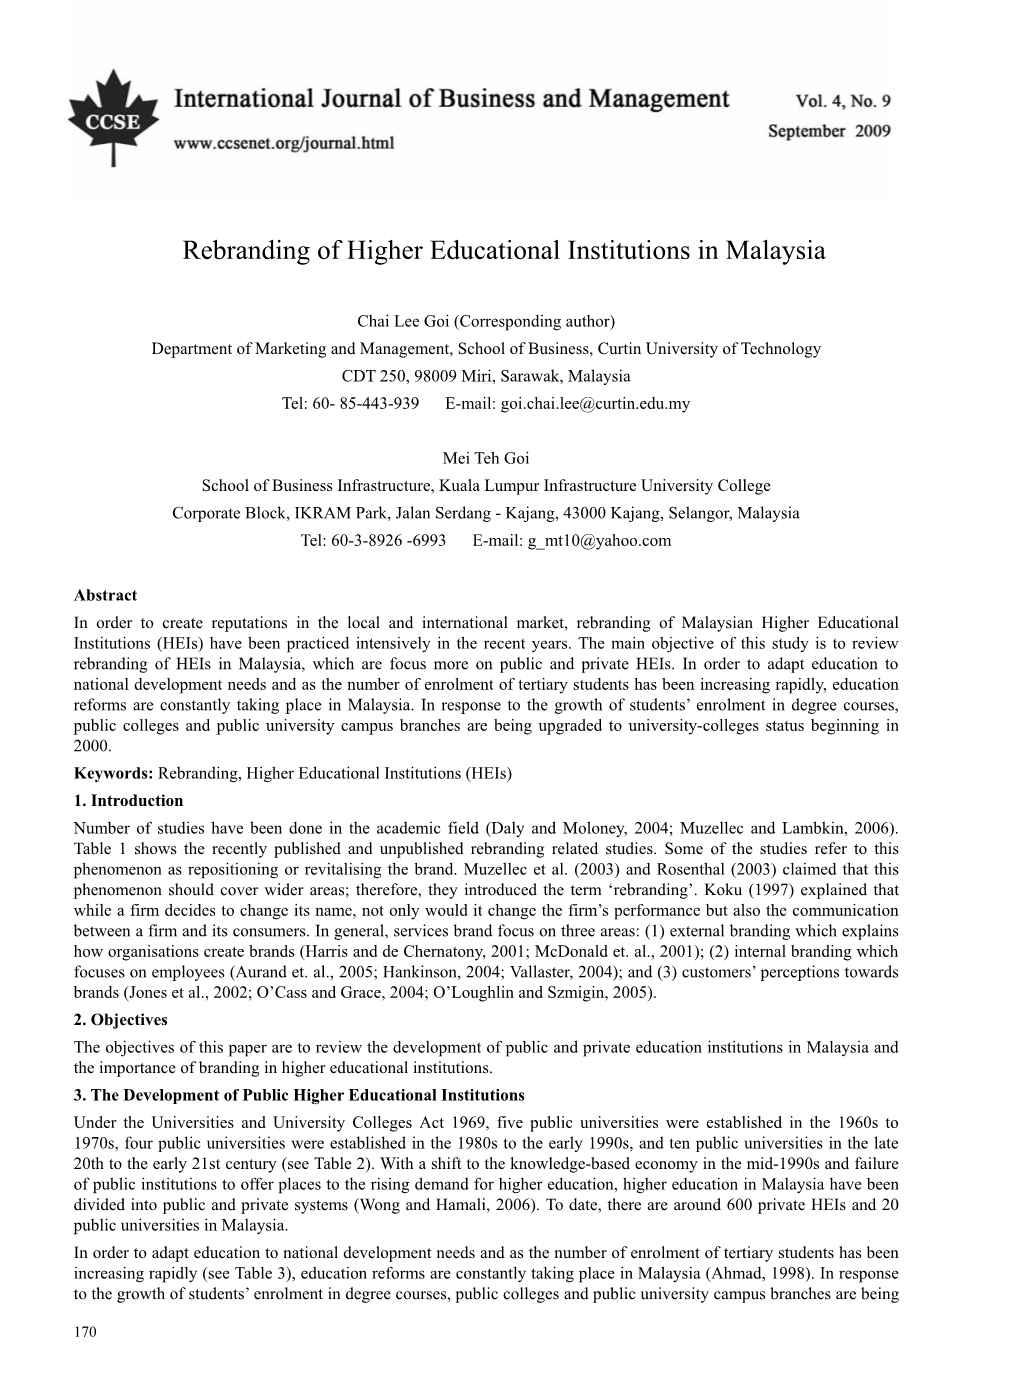 Rebranding of Higher Educational Institutions in Malaysia